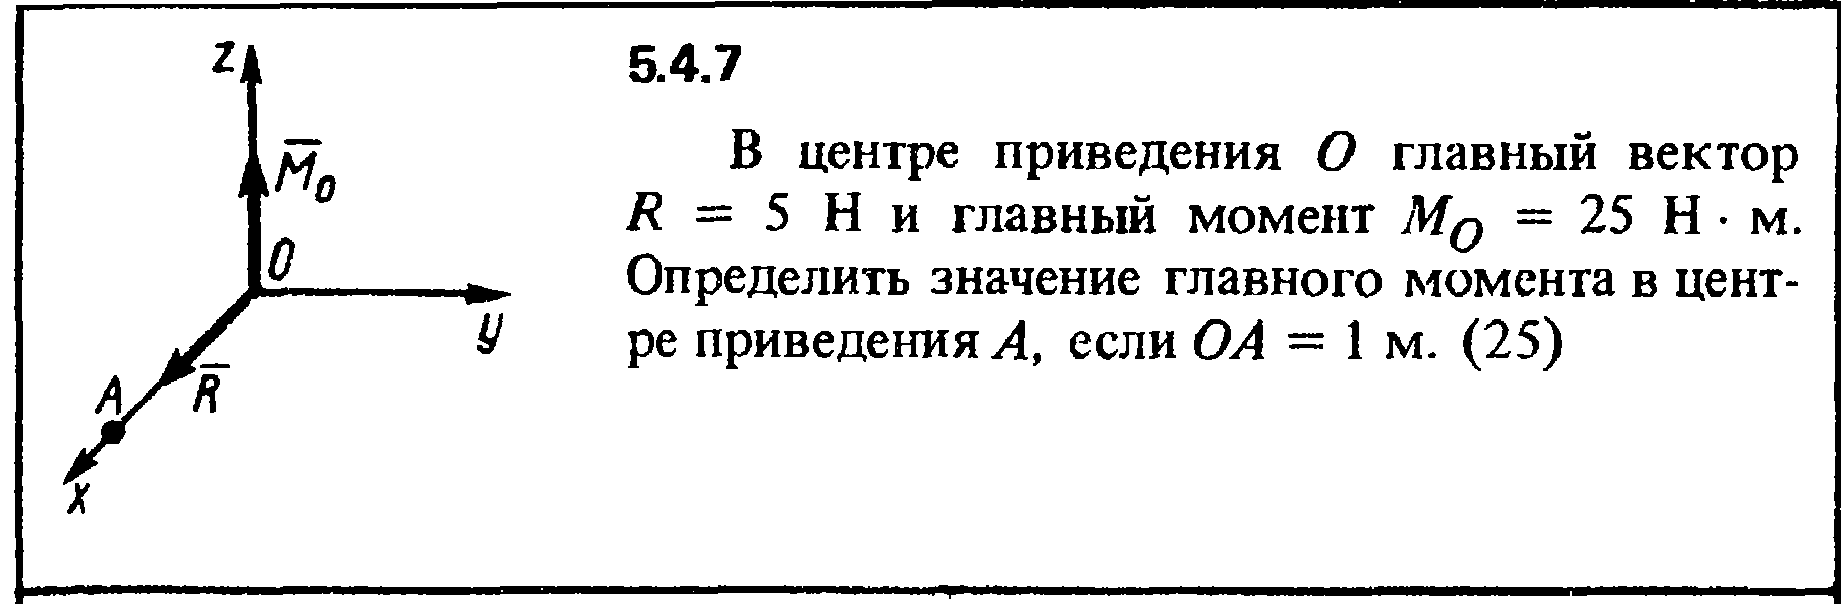 5.4.7 The solution of the problem of the collection of